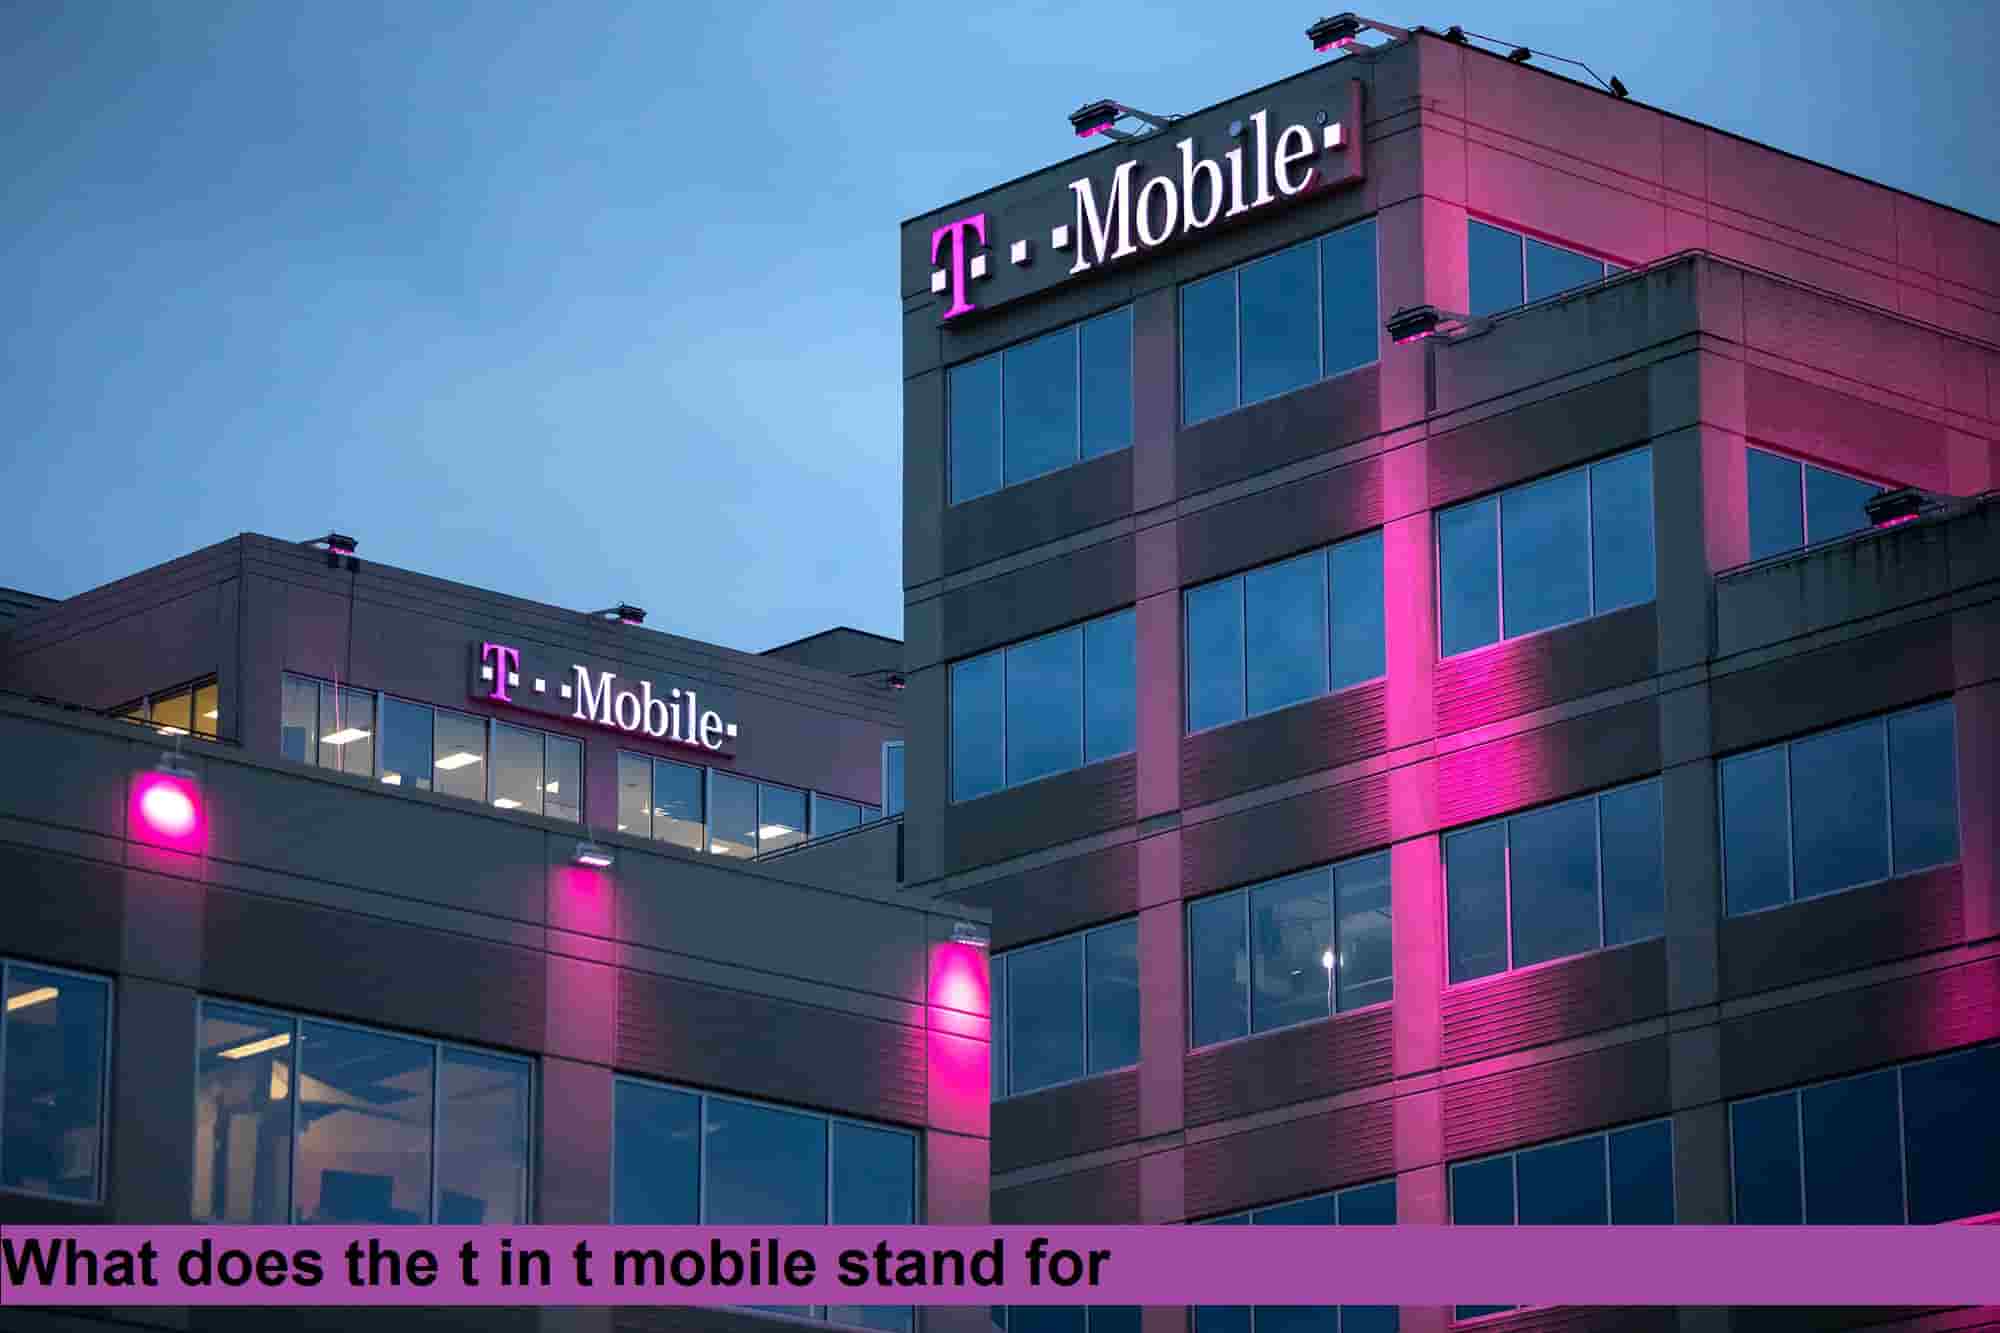 What does the t in t mobile stand for